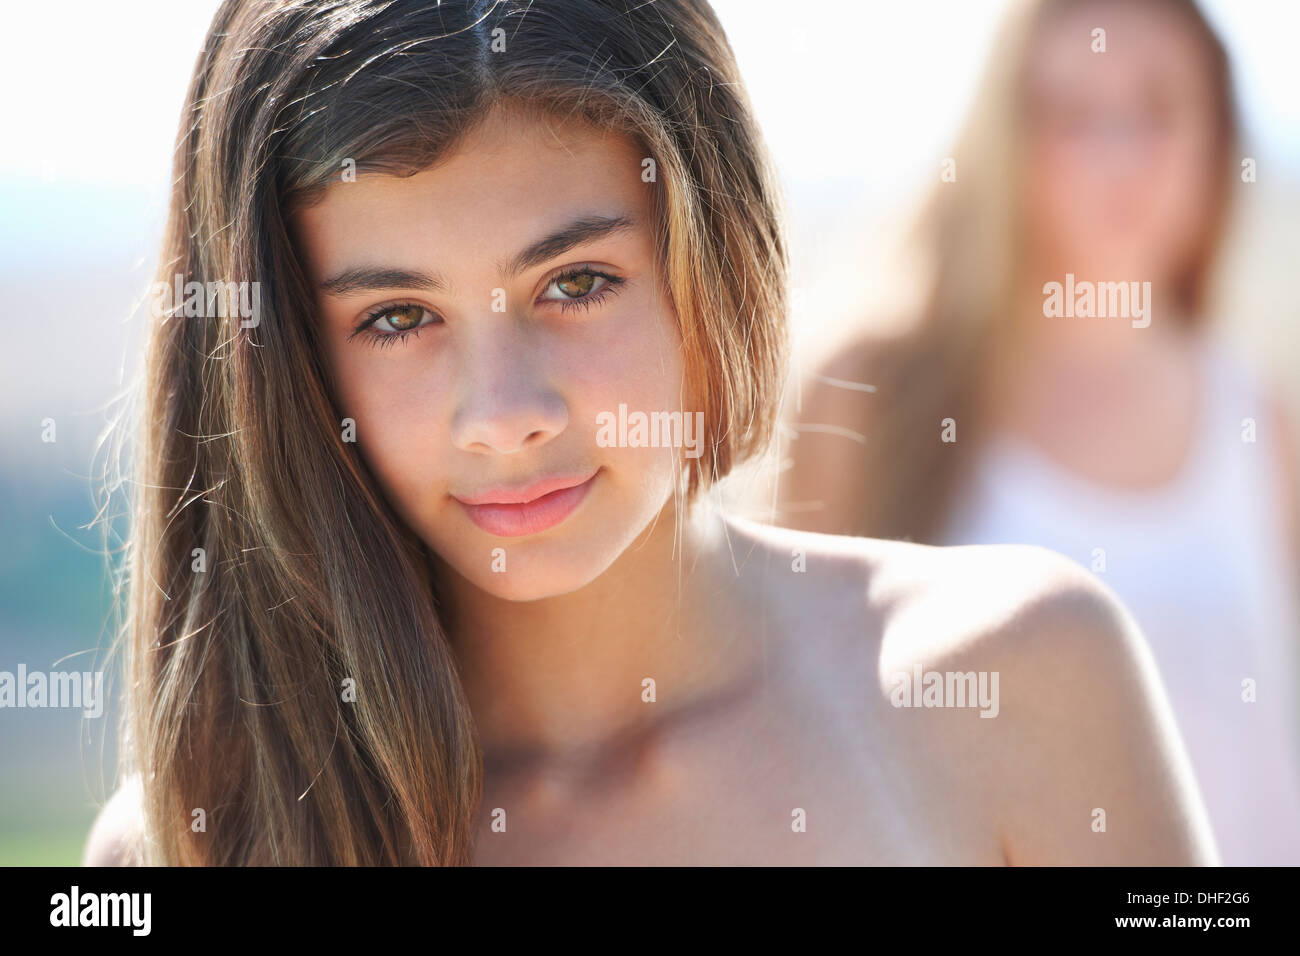 Portrait of teenage girl, focus on foreground Stock Photo